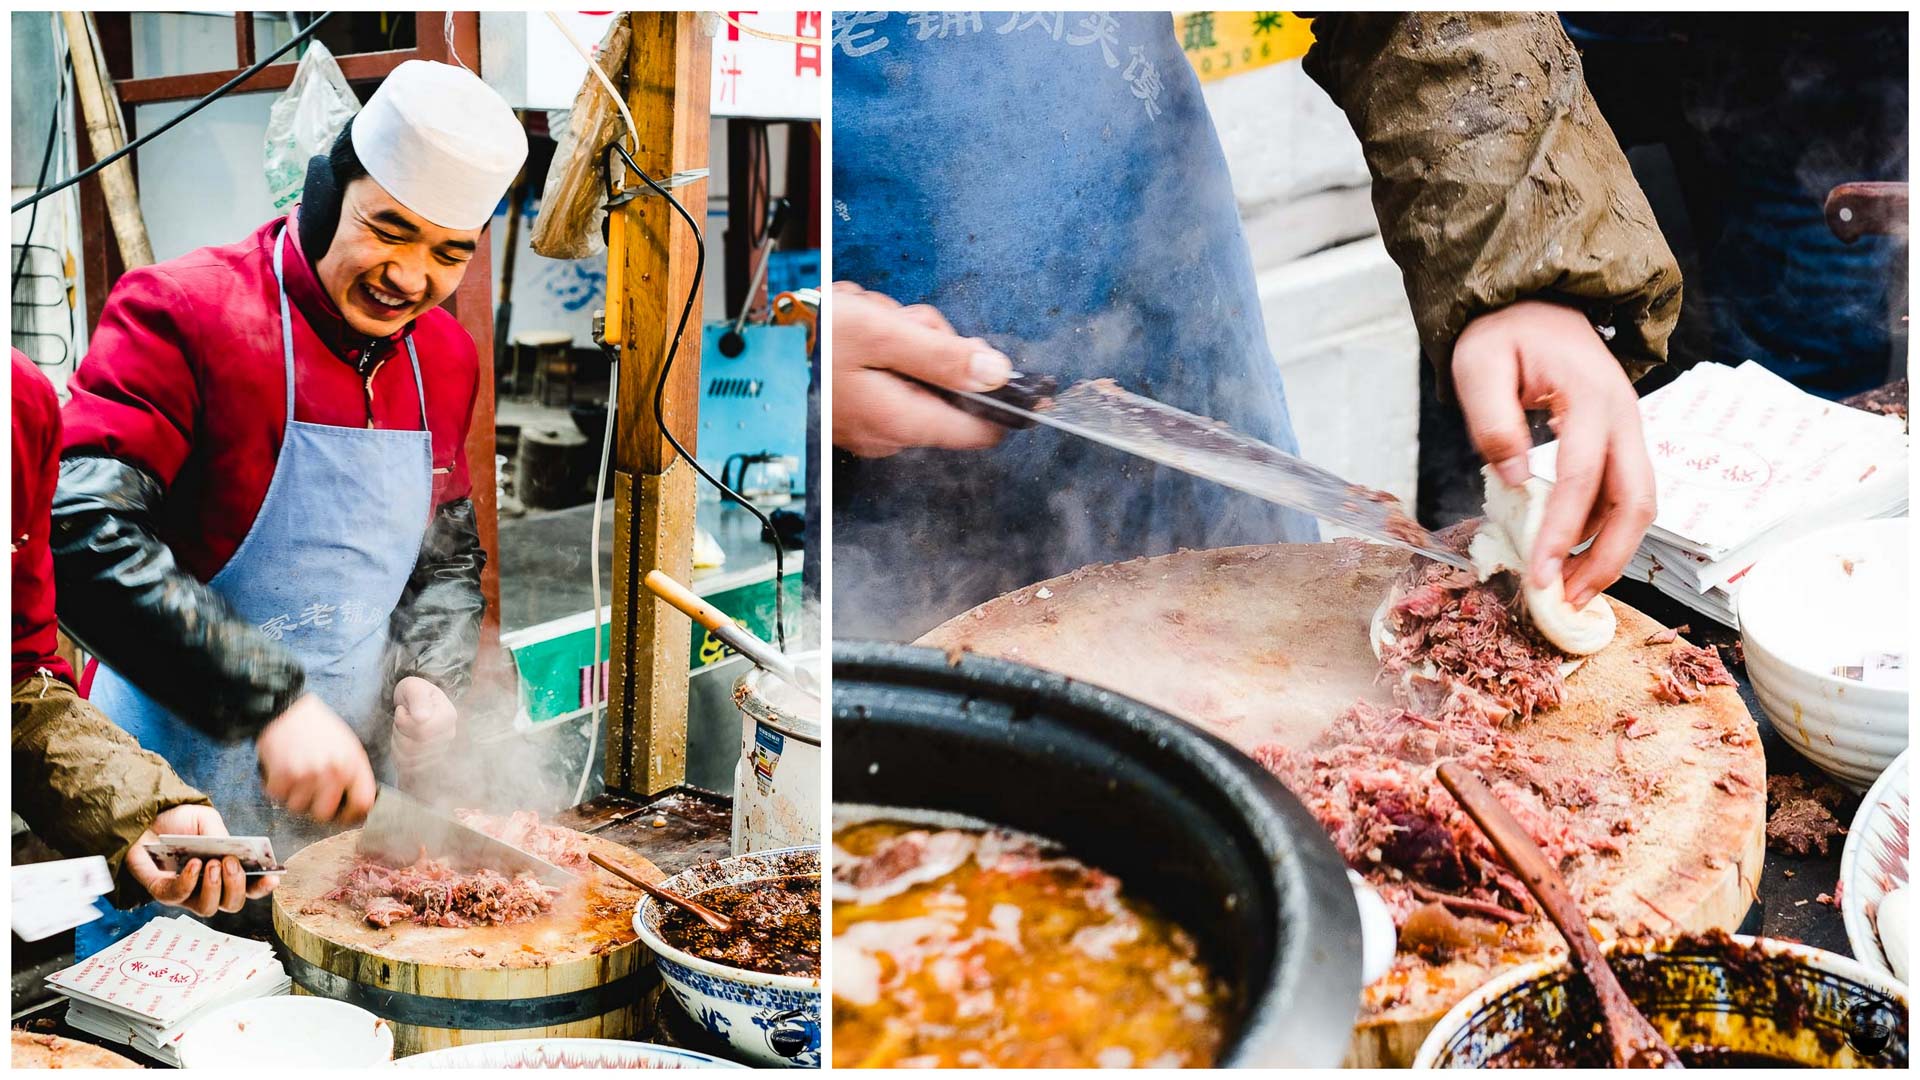 50 Must-Eat Street Food Dishes of Xi'An's Muslim Quarter - I'm Still Hungry